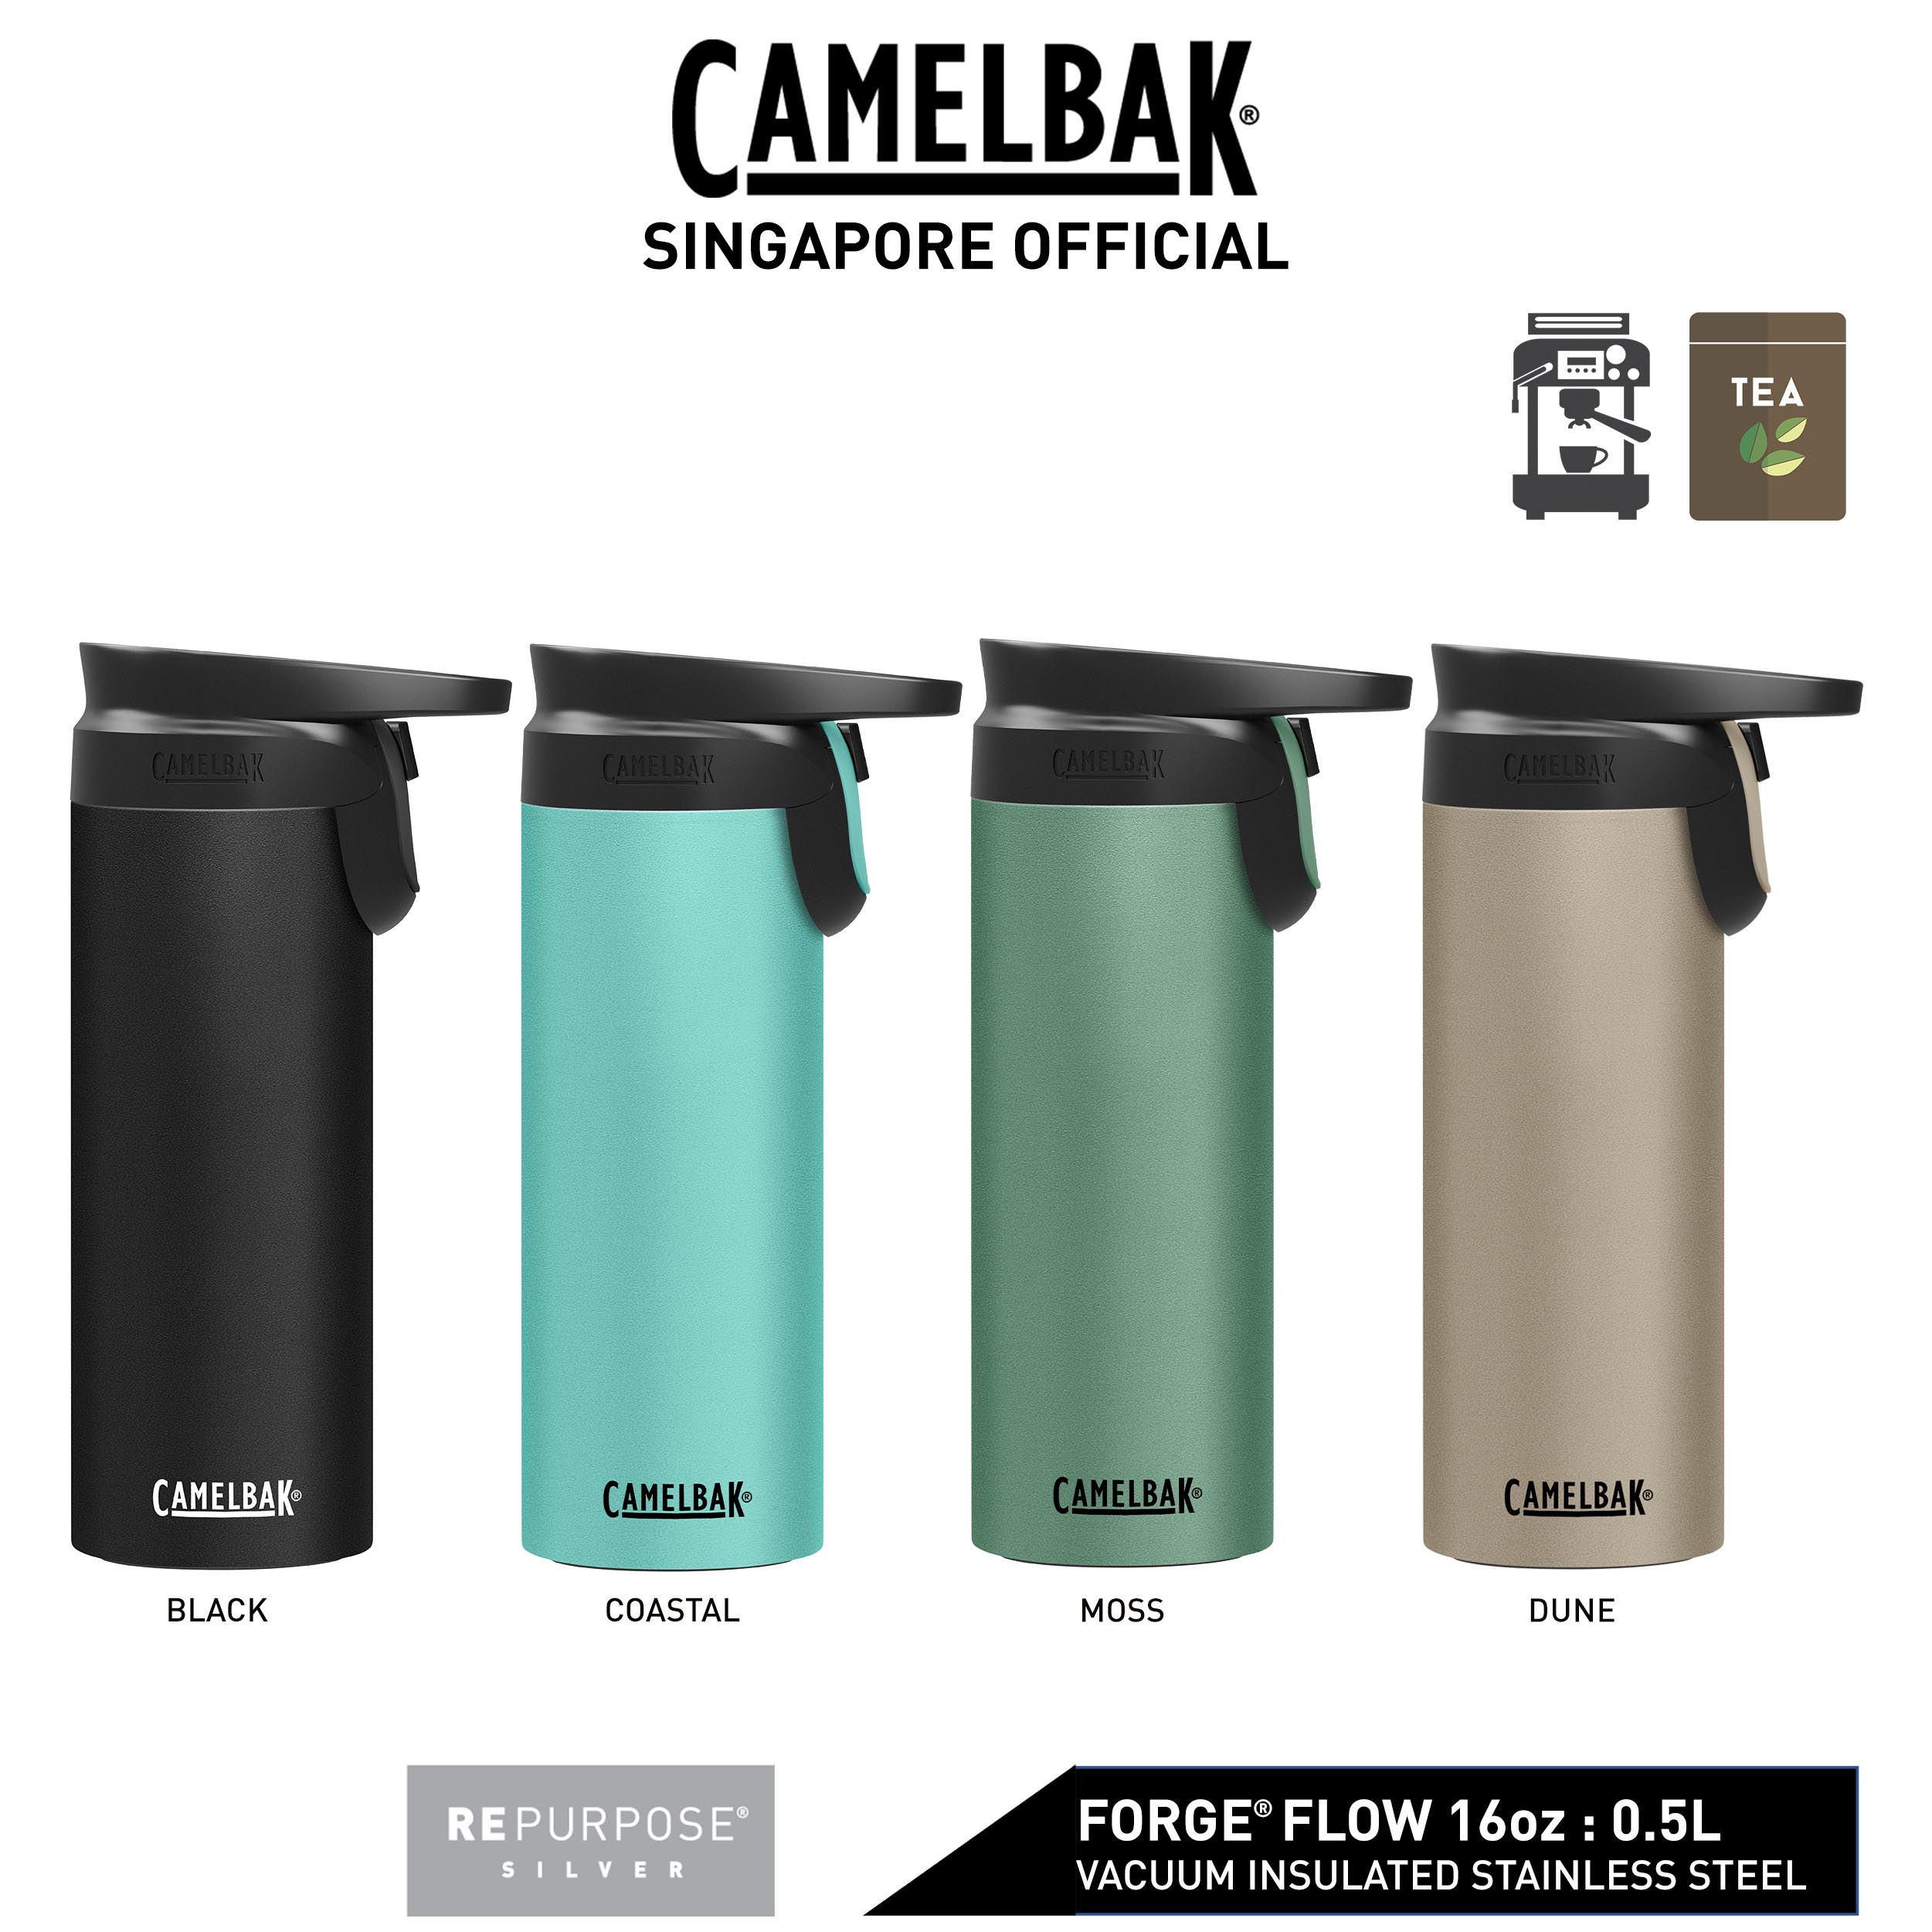 Camelbak 12oz Forge Flow Vacuum Insulated Stainless Steel Travel